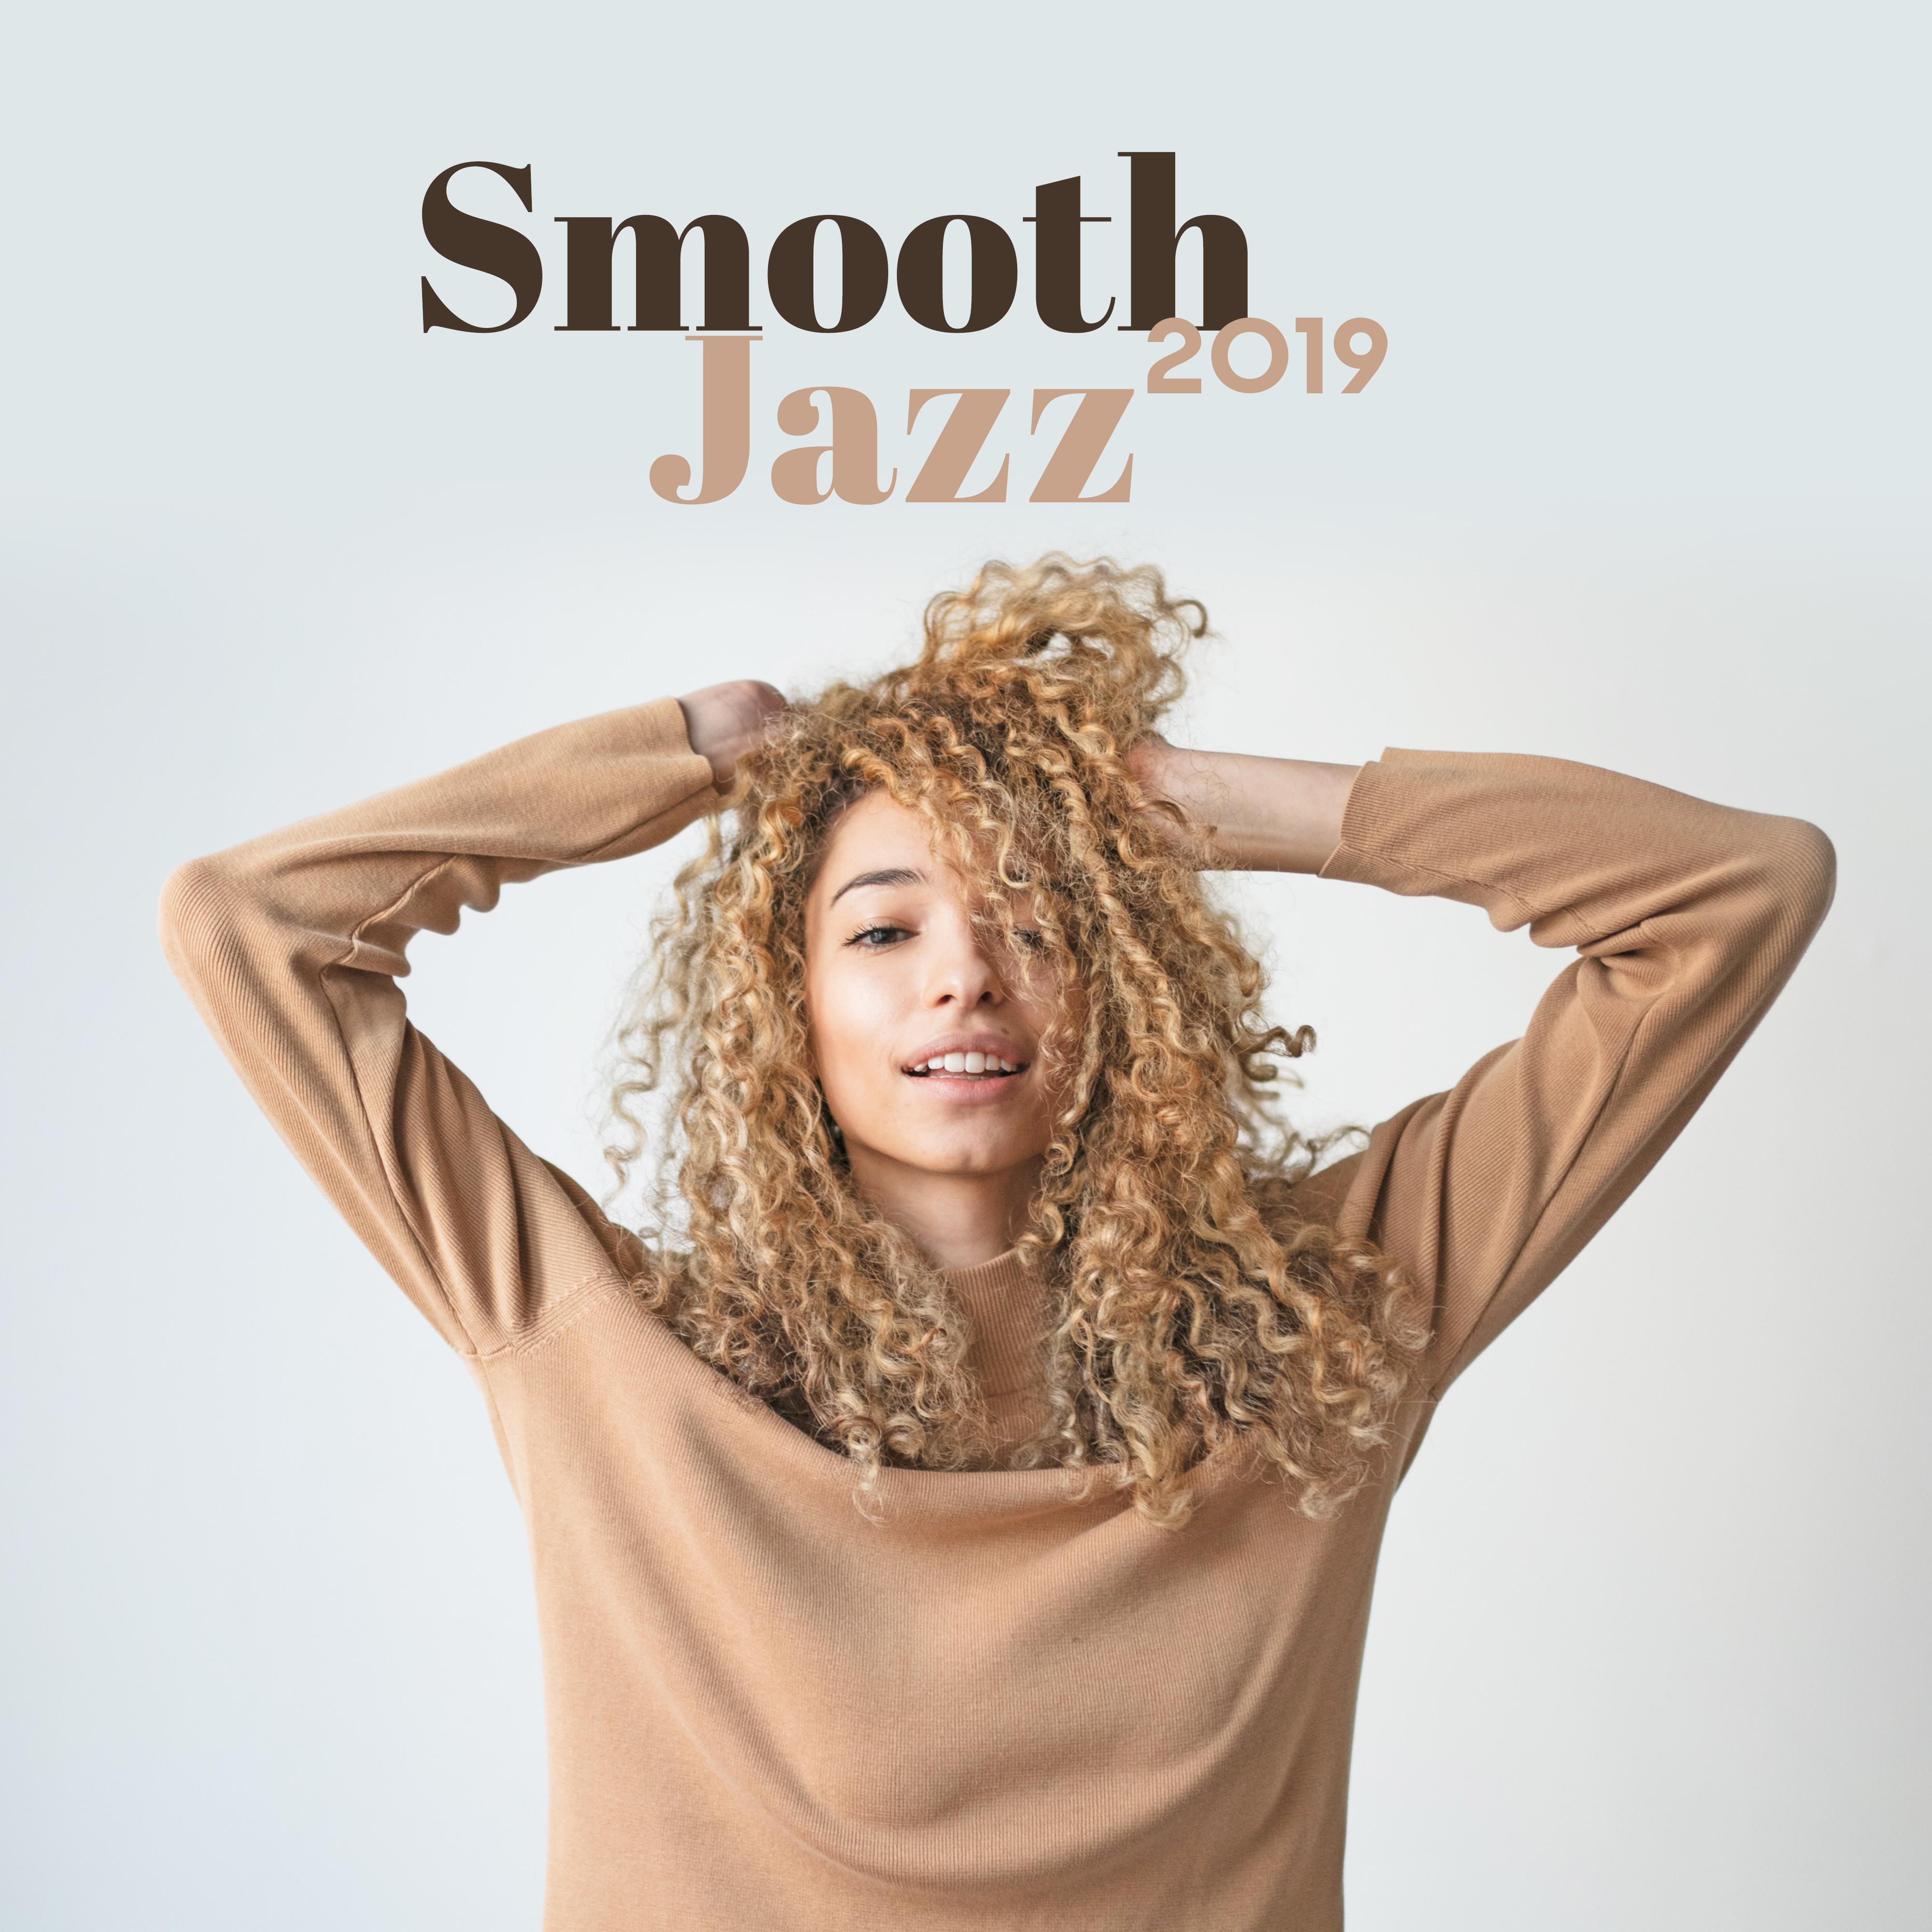 Smooth Jazz 2019: Cocktail Music, Bar Chillout, Jazz Music Ambient, Jazz Relaxation, Lounge